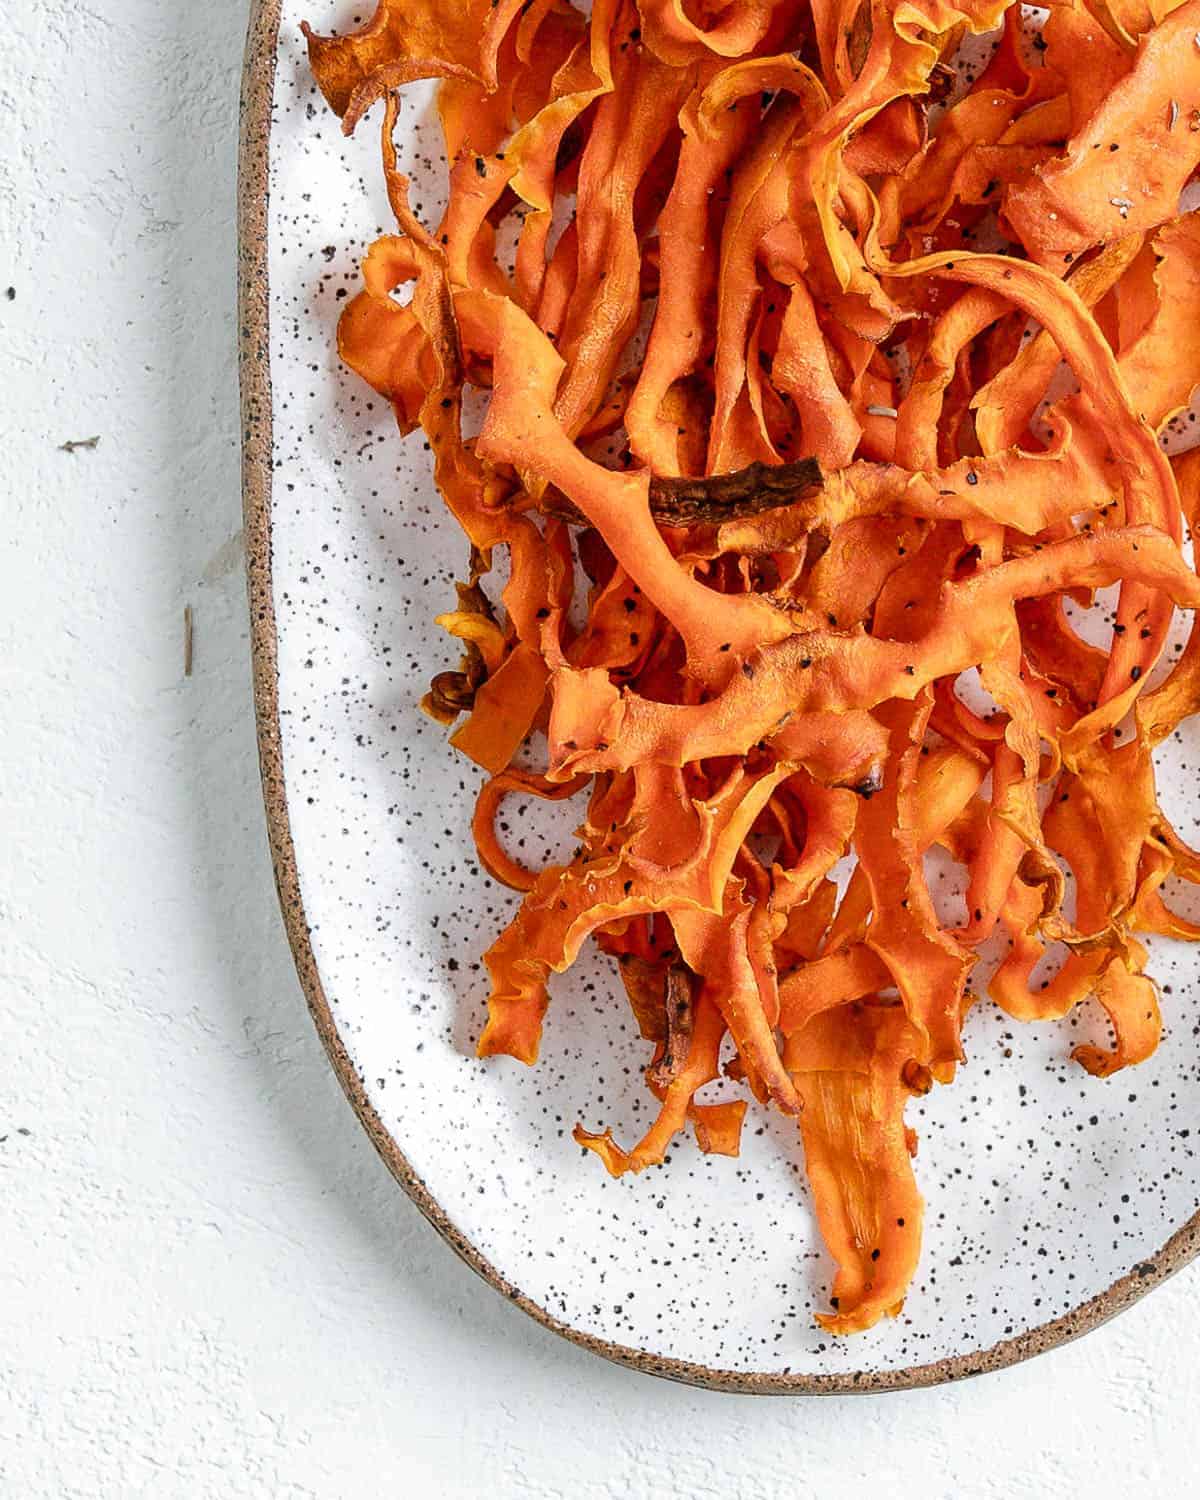 completed carrot fries in a white platter against a white background